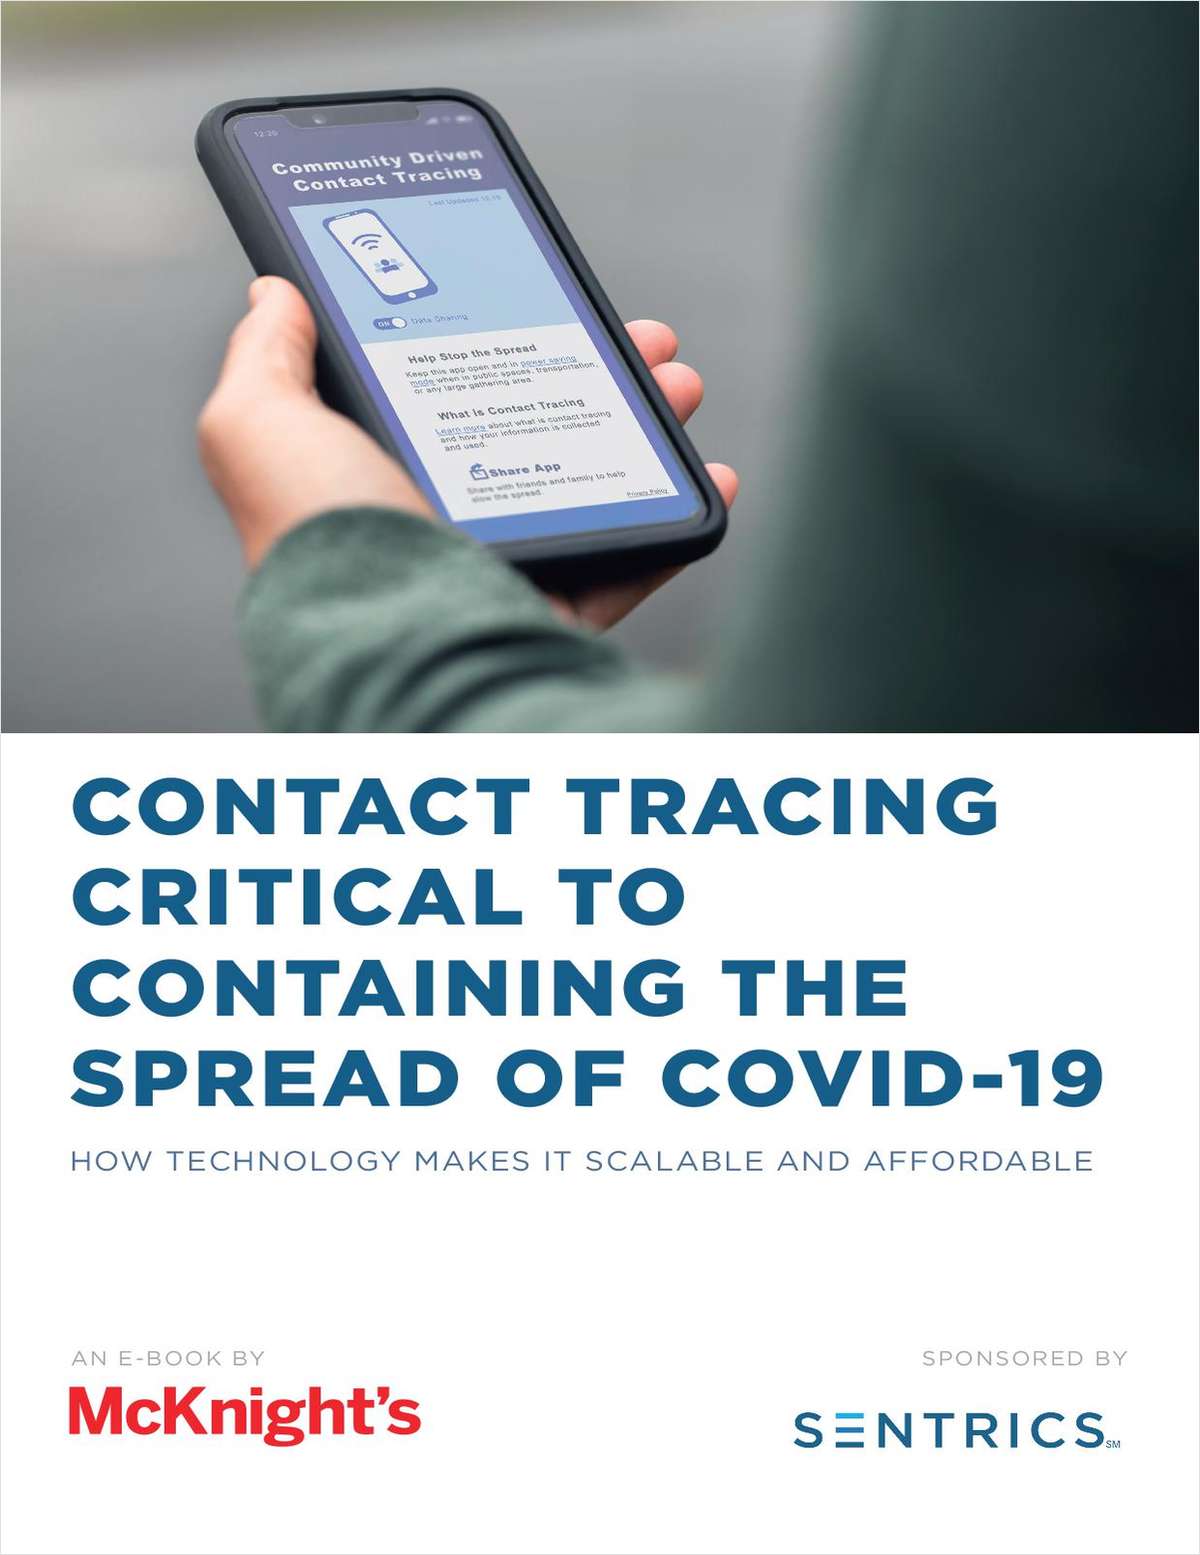 Contact Tracing Critical to Containing the Spread of COVID-19